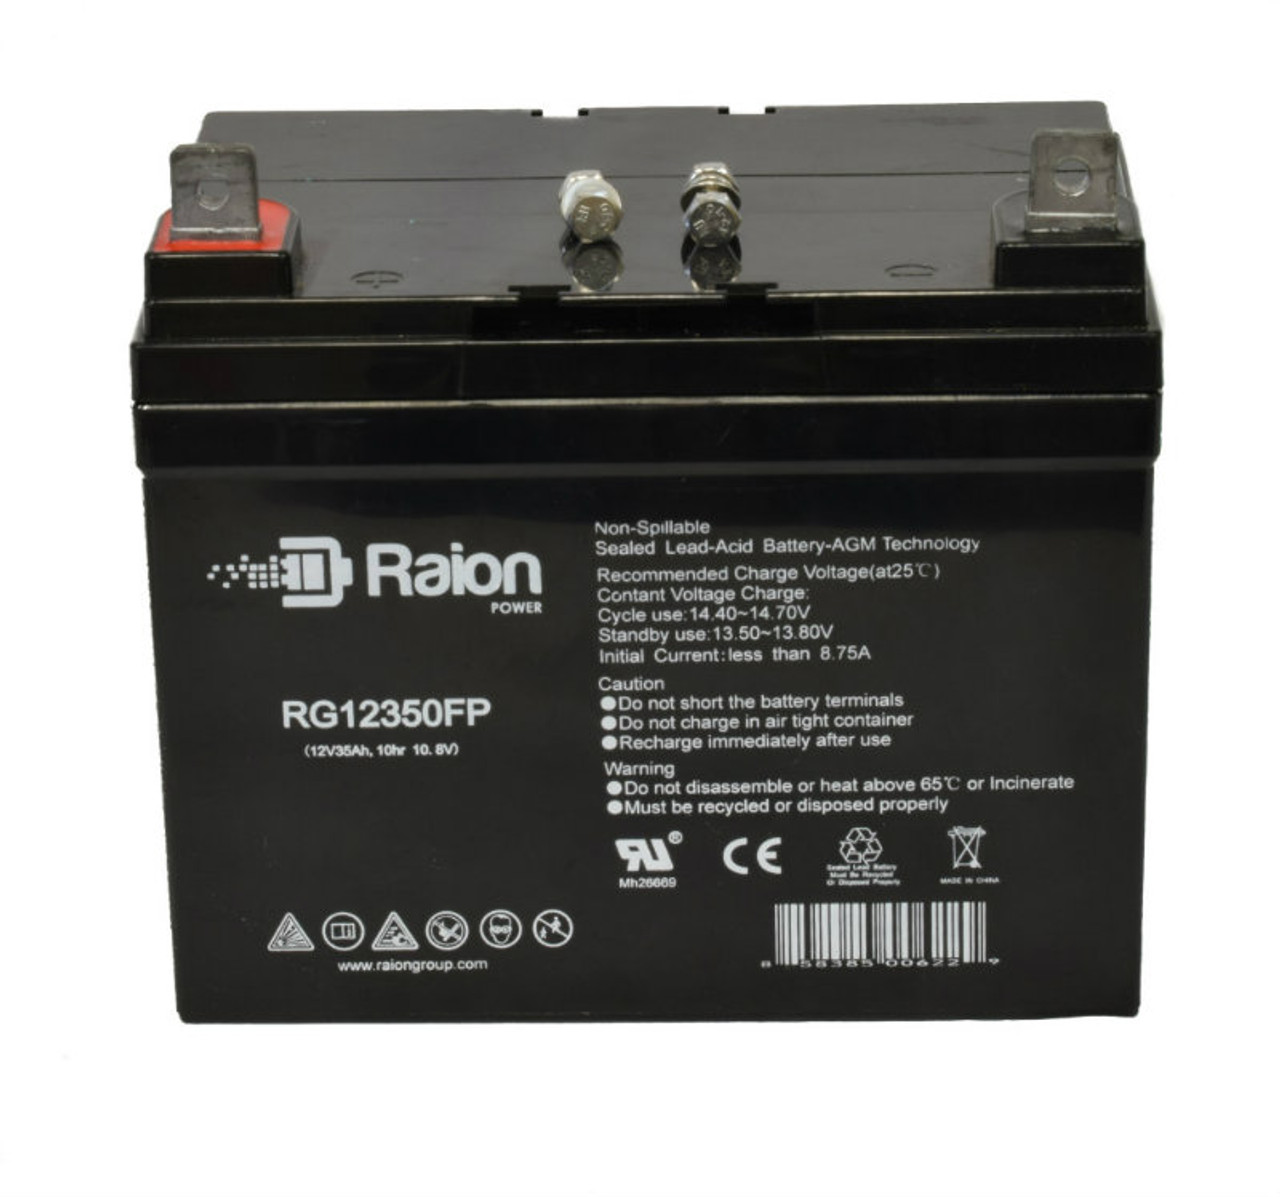 Raion Power RG12350FP 12V 35Ah Lead Acid Battery for Electric Mobility UltraLite Scooter Model 115